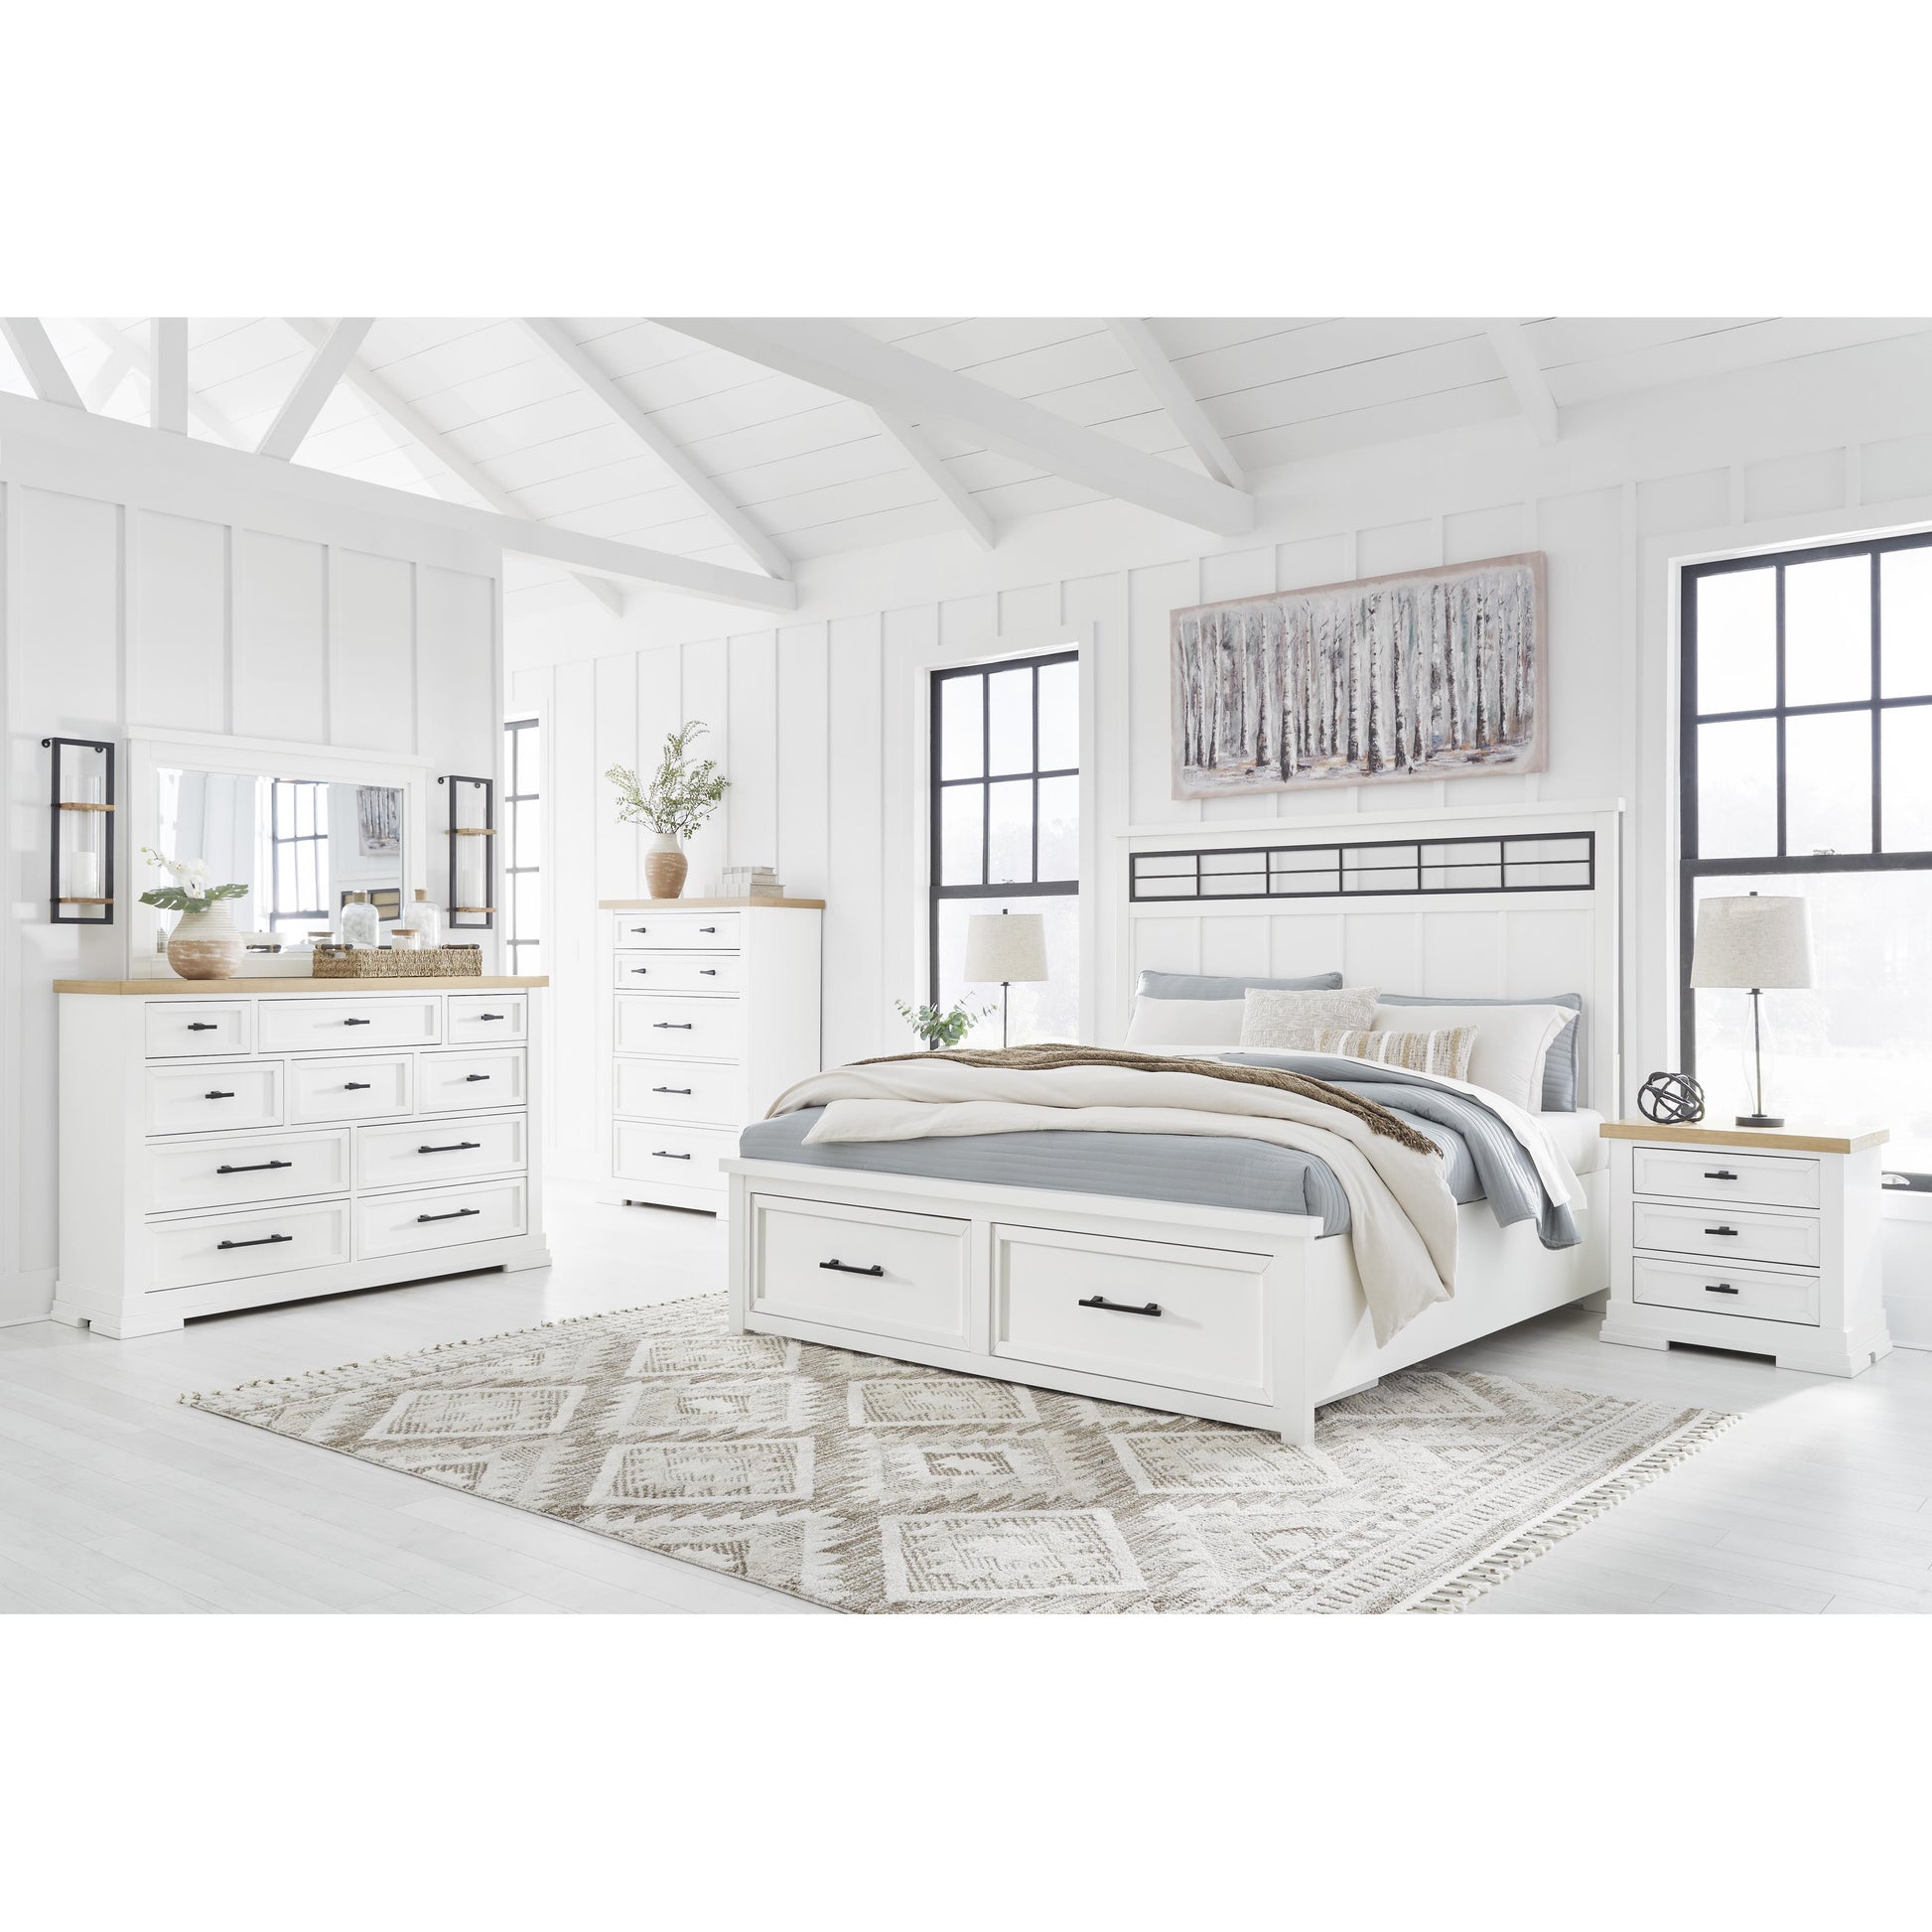 Signature Design by Ashley Ashbryn California King Panel Bed with Storage B844-58/B844-56S/B844-94 IMAGE 7